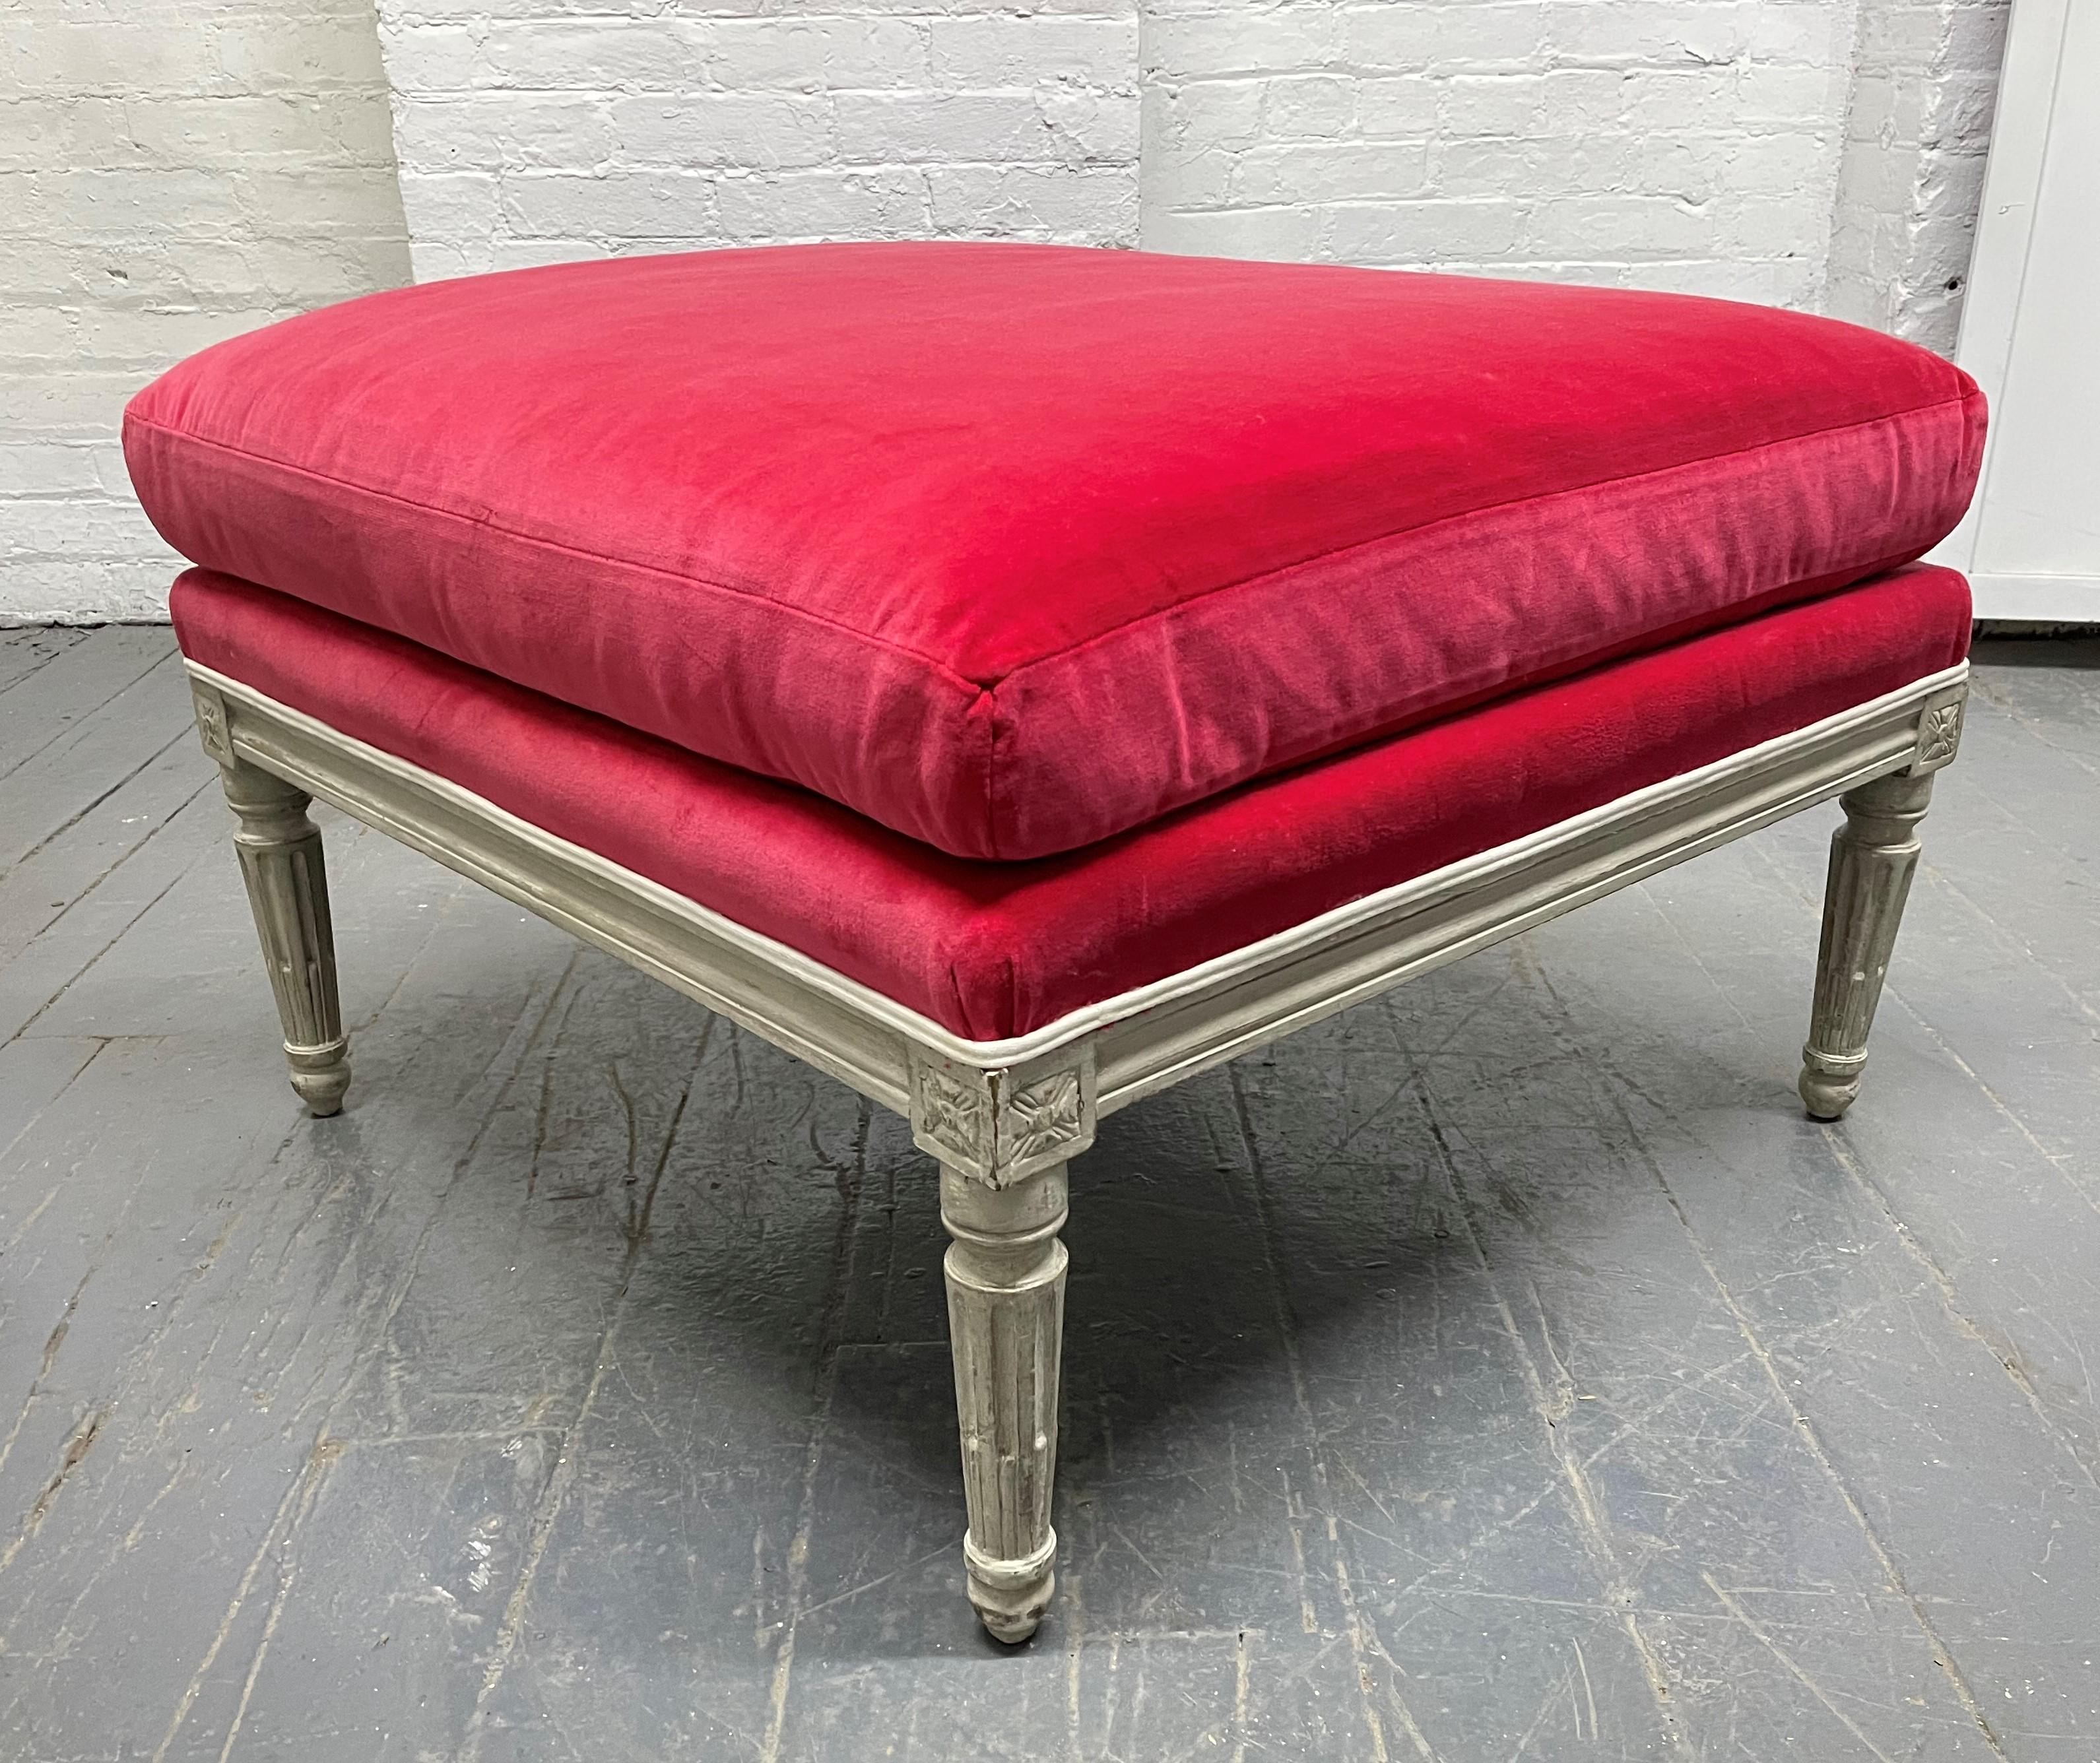 Louis XIV style ottoman. The ottoman has original fuchsia velvet upholstery with a painted wood frame.